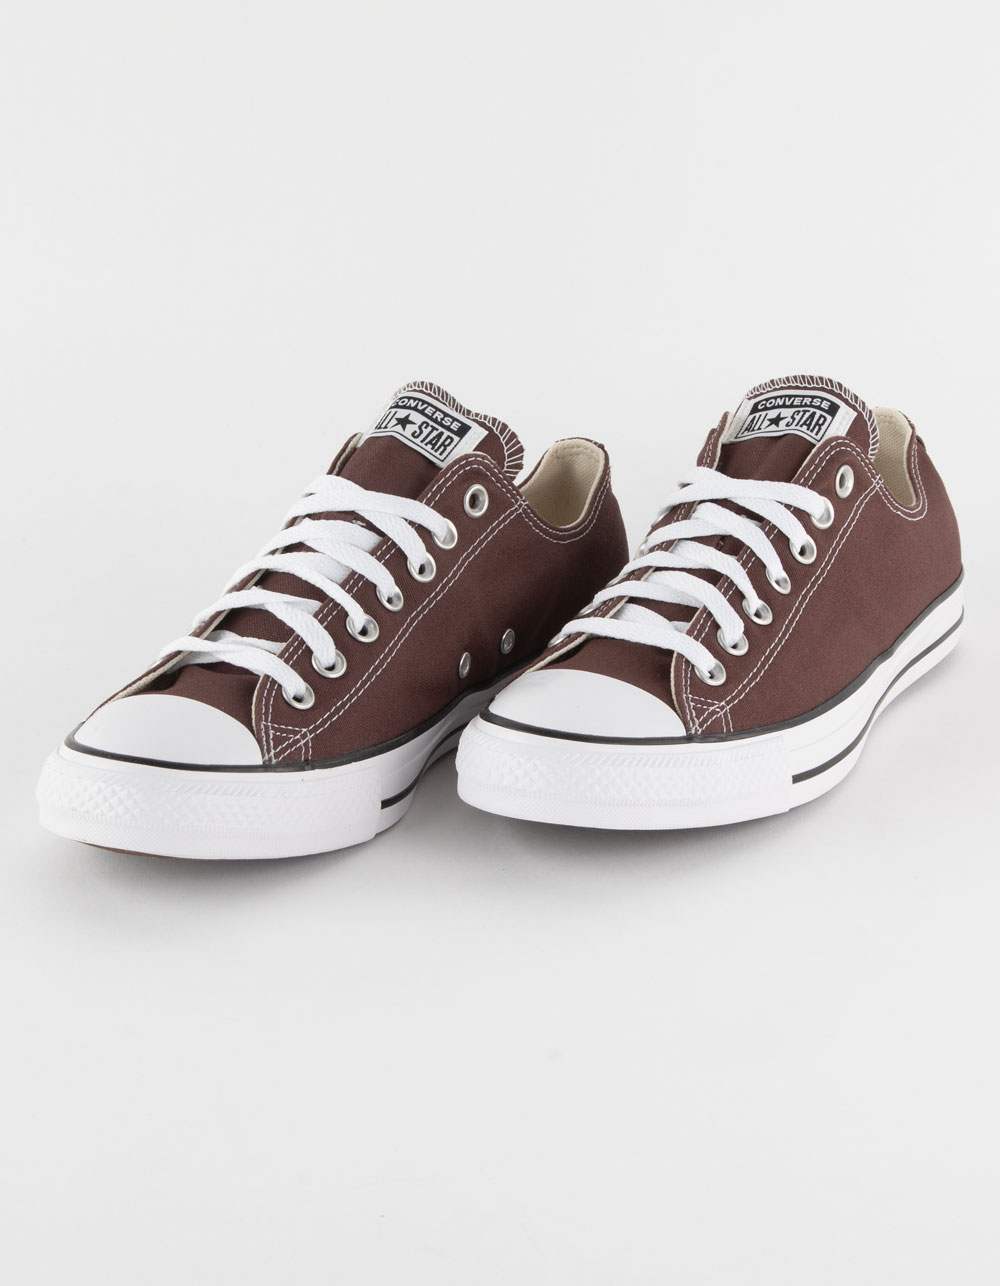 CONVERSE Chuck Taylor All Star Low Top shoes